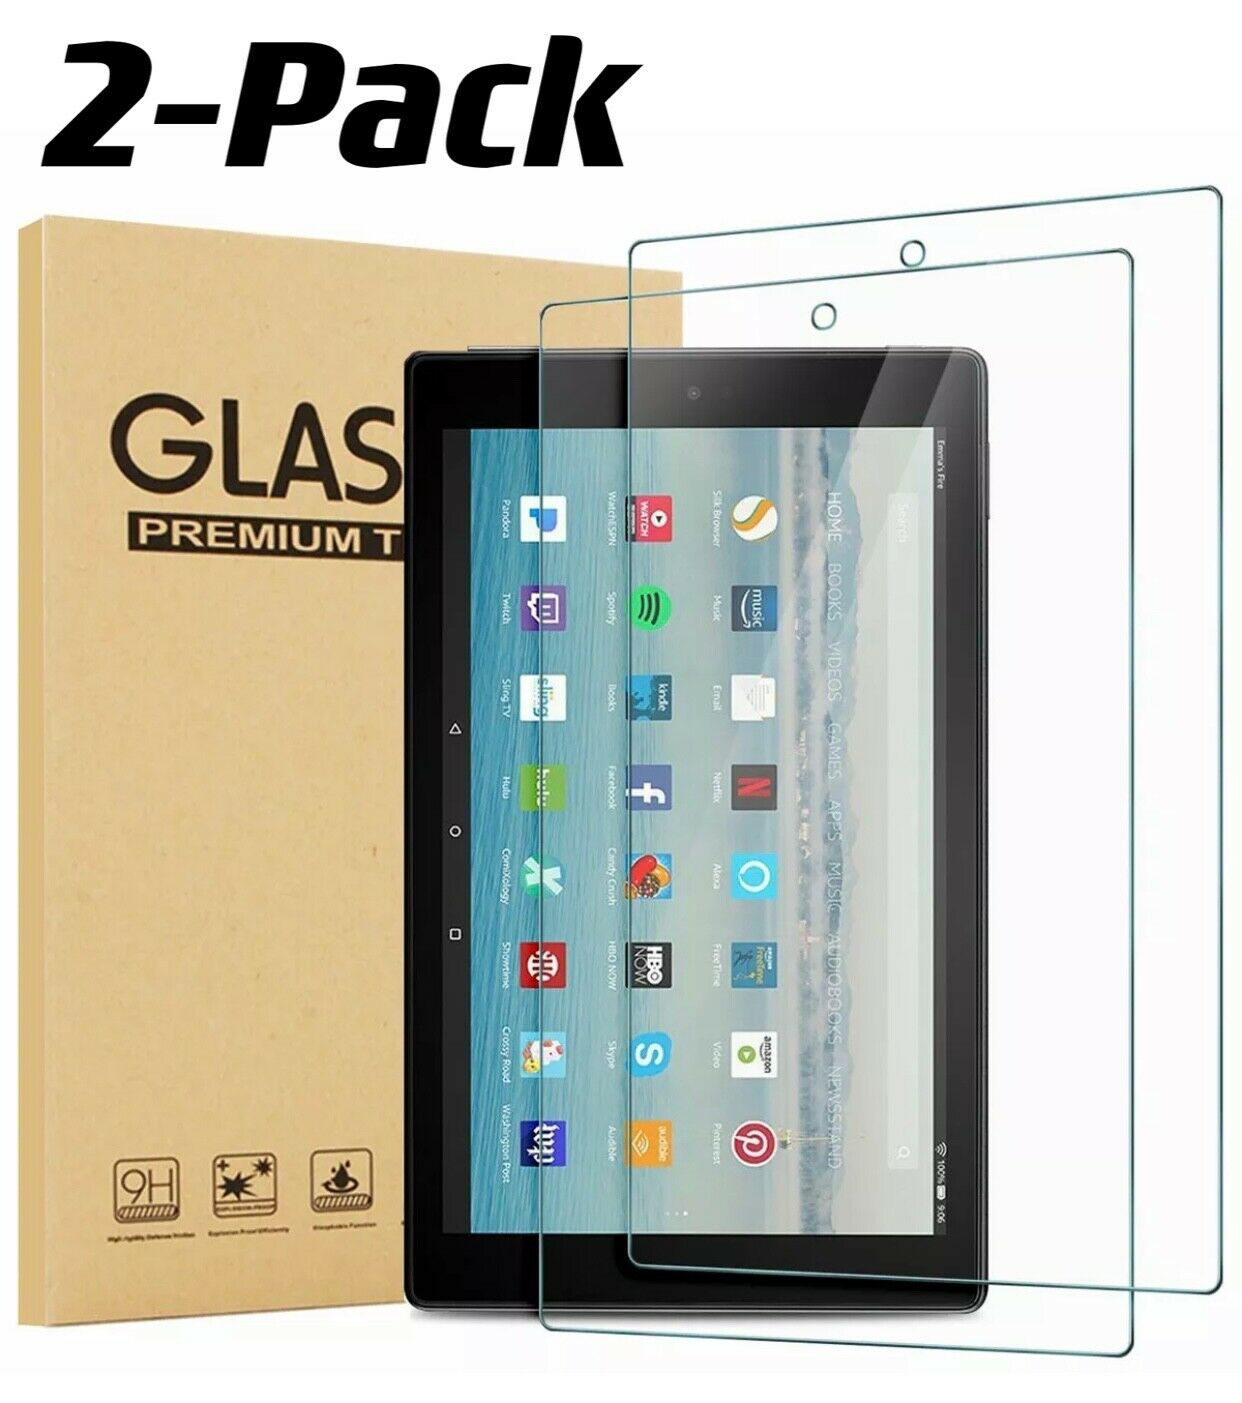 2 Pack Tempered Glass Screen Protector For Amazon Fire Hd 10 Tablet (10.1 Inch)